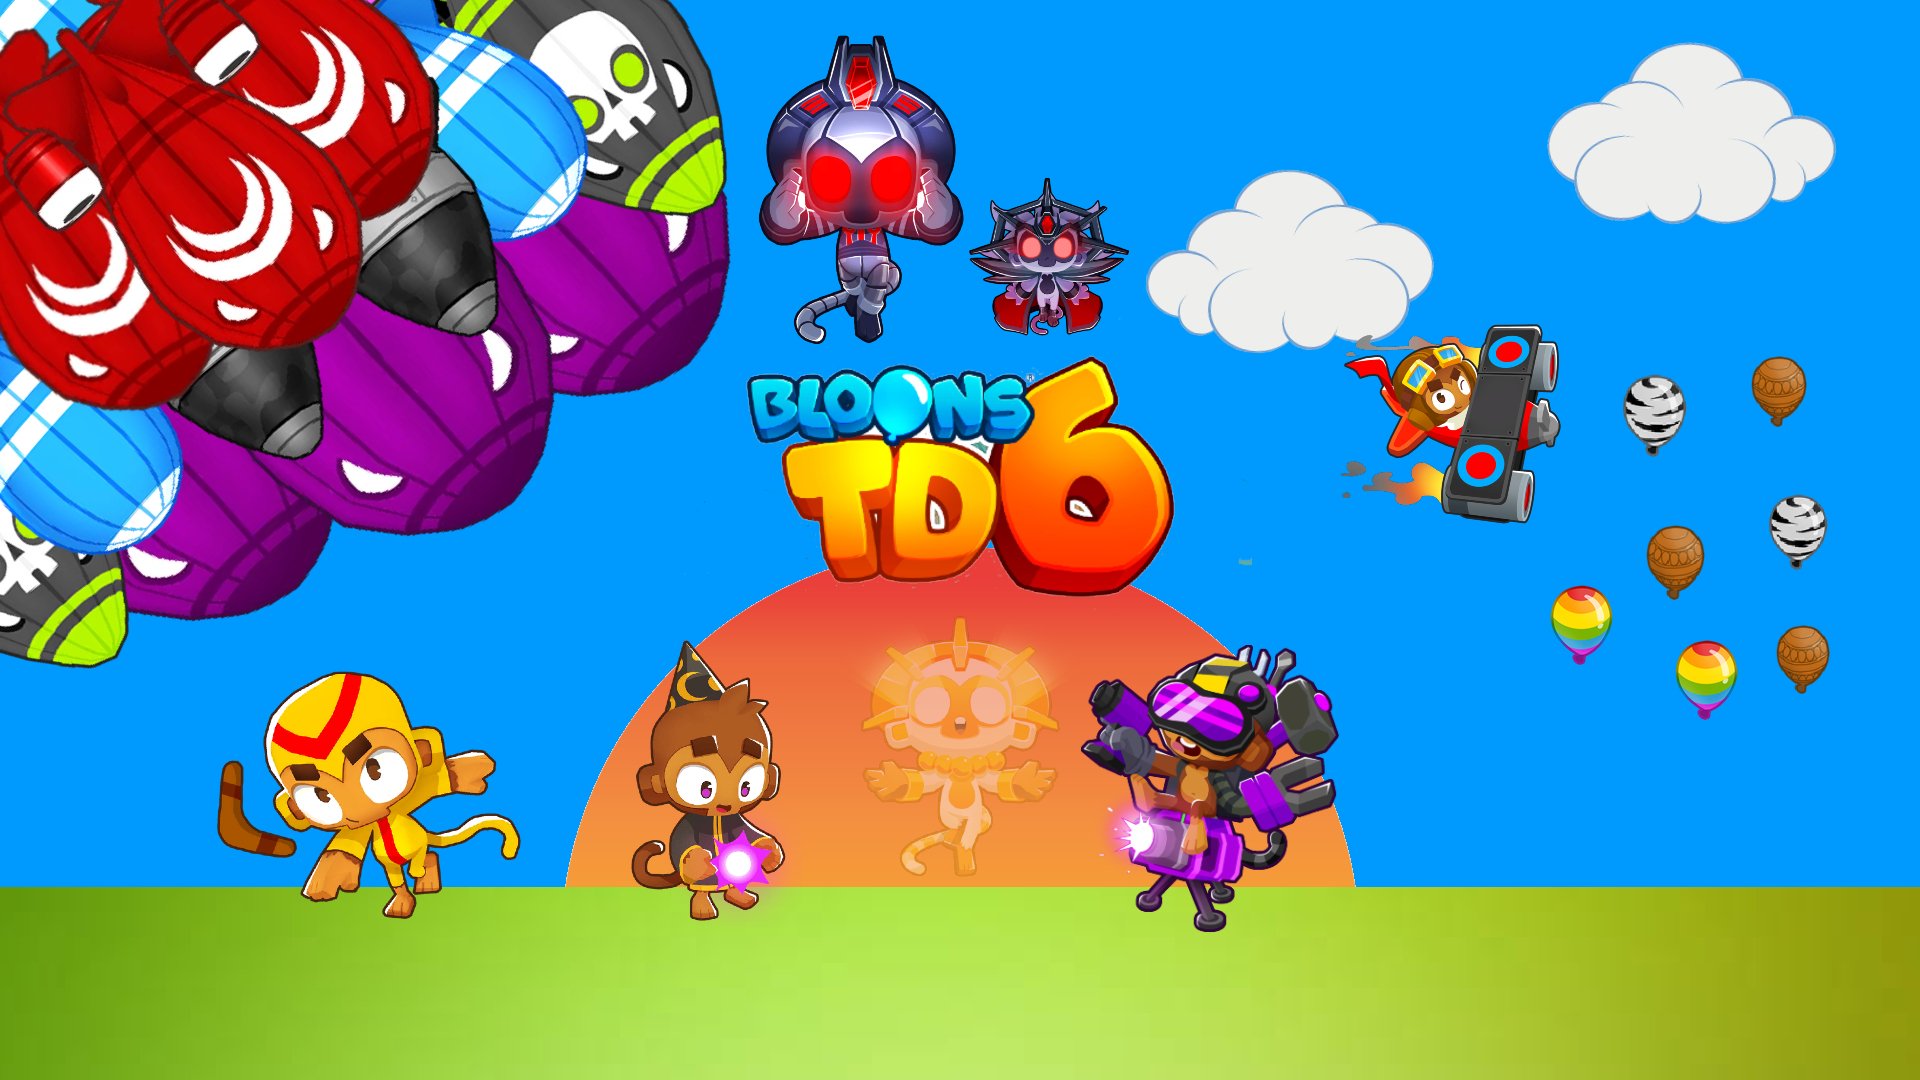 10 Bloons TD 6 HD Wallpapers and Backgrounds